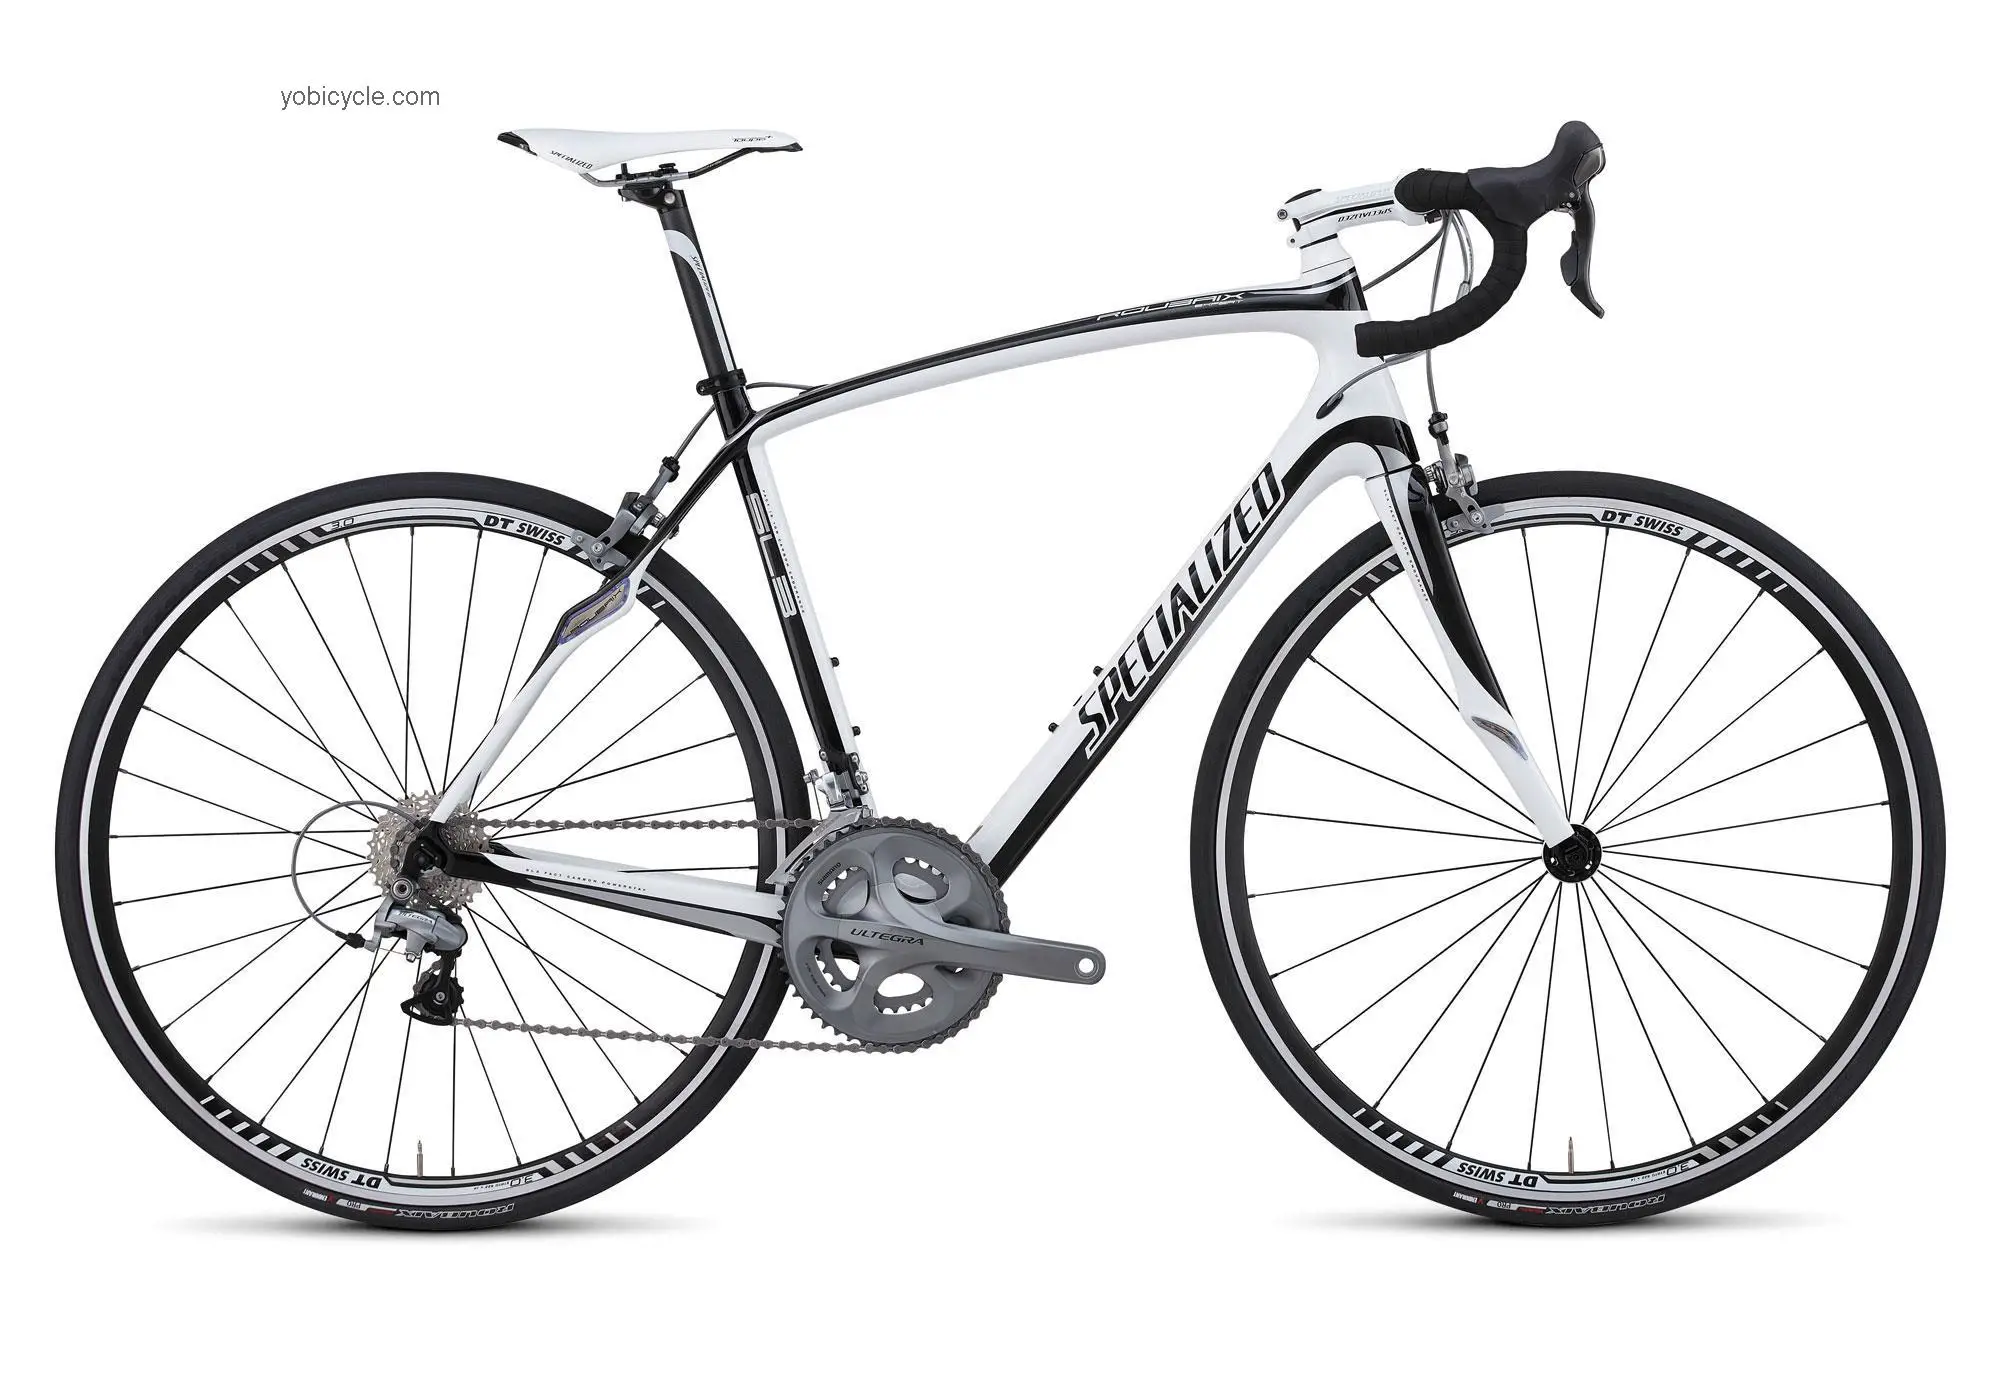 Specialized Roubaix SL3 Expert Compact 2012 comparison online with competitors